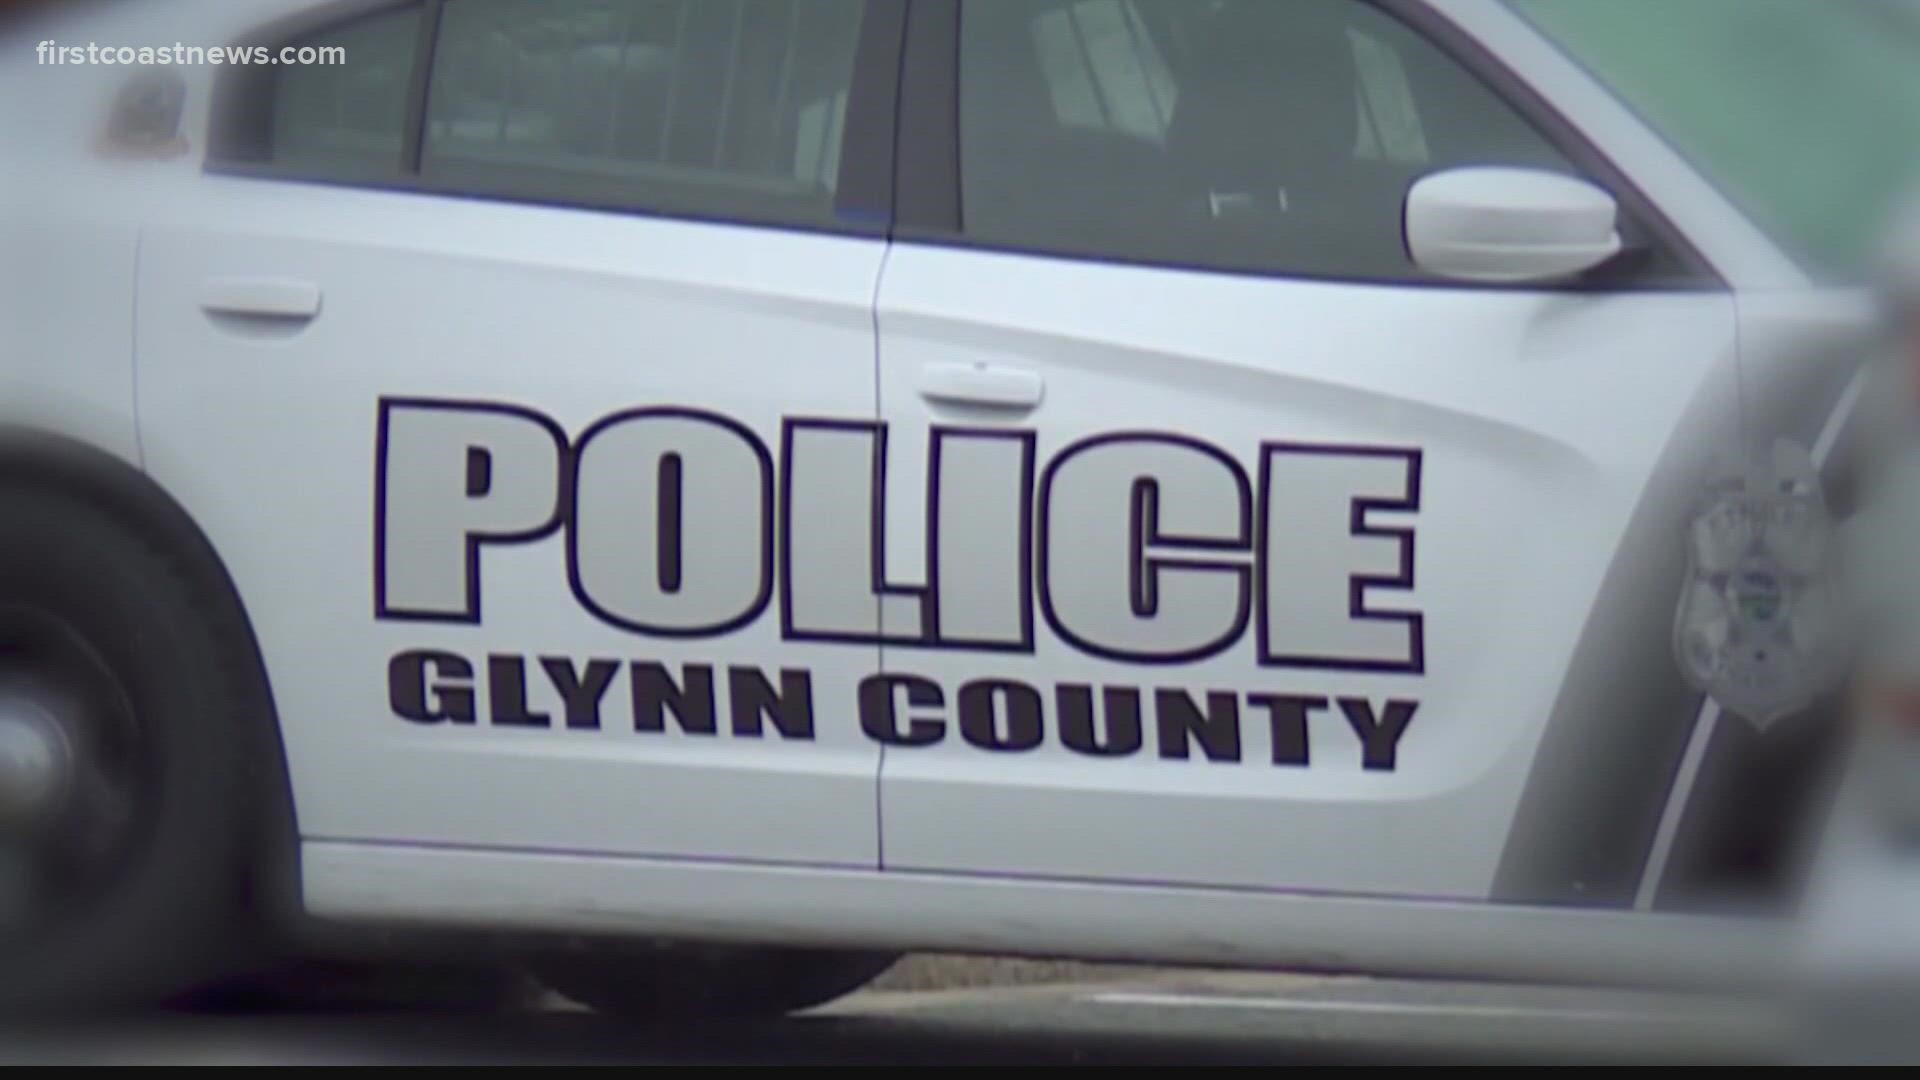 The concerns will be used to create recommendations to improve community-police relations in Glynn County.